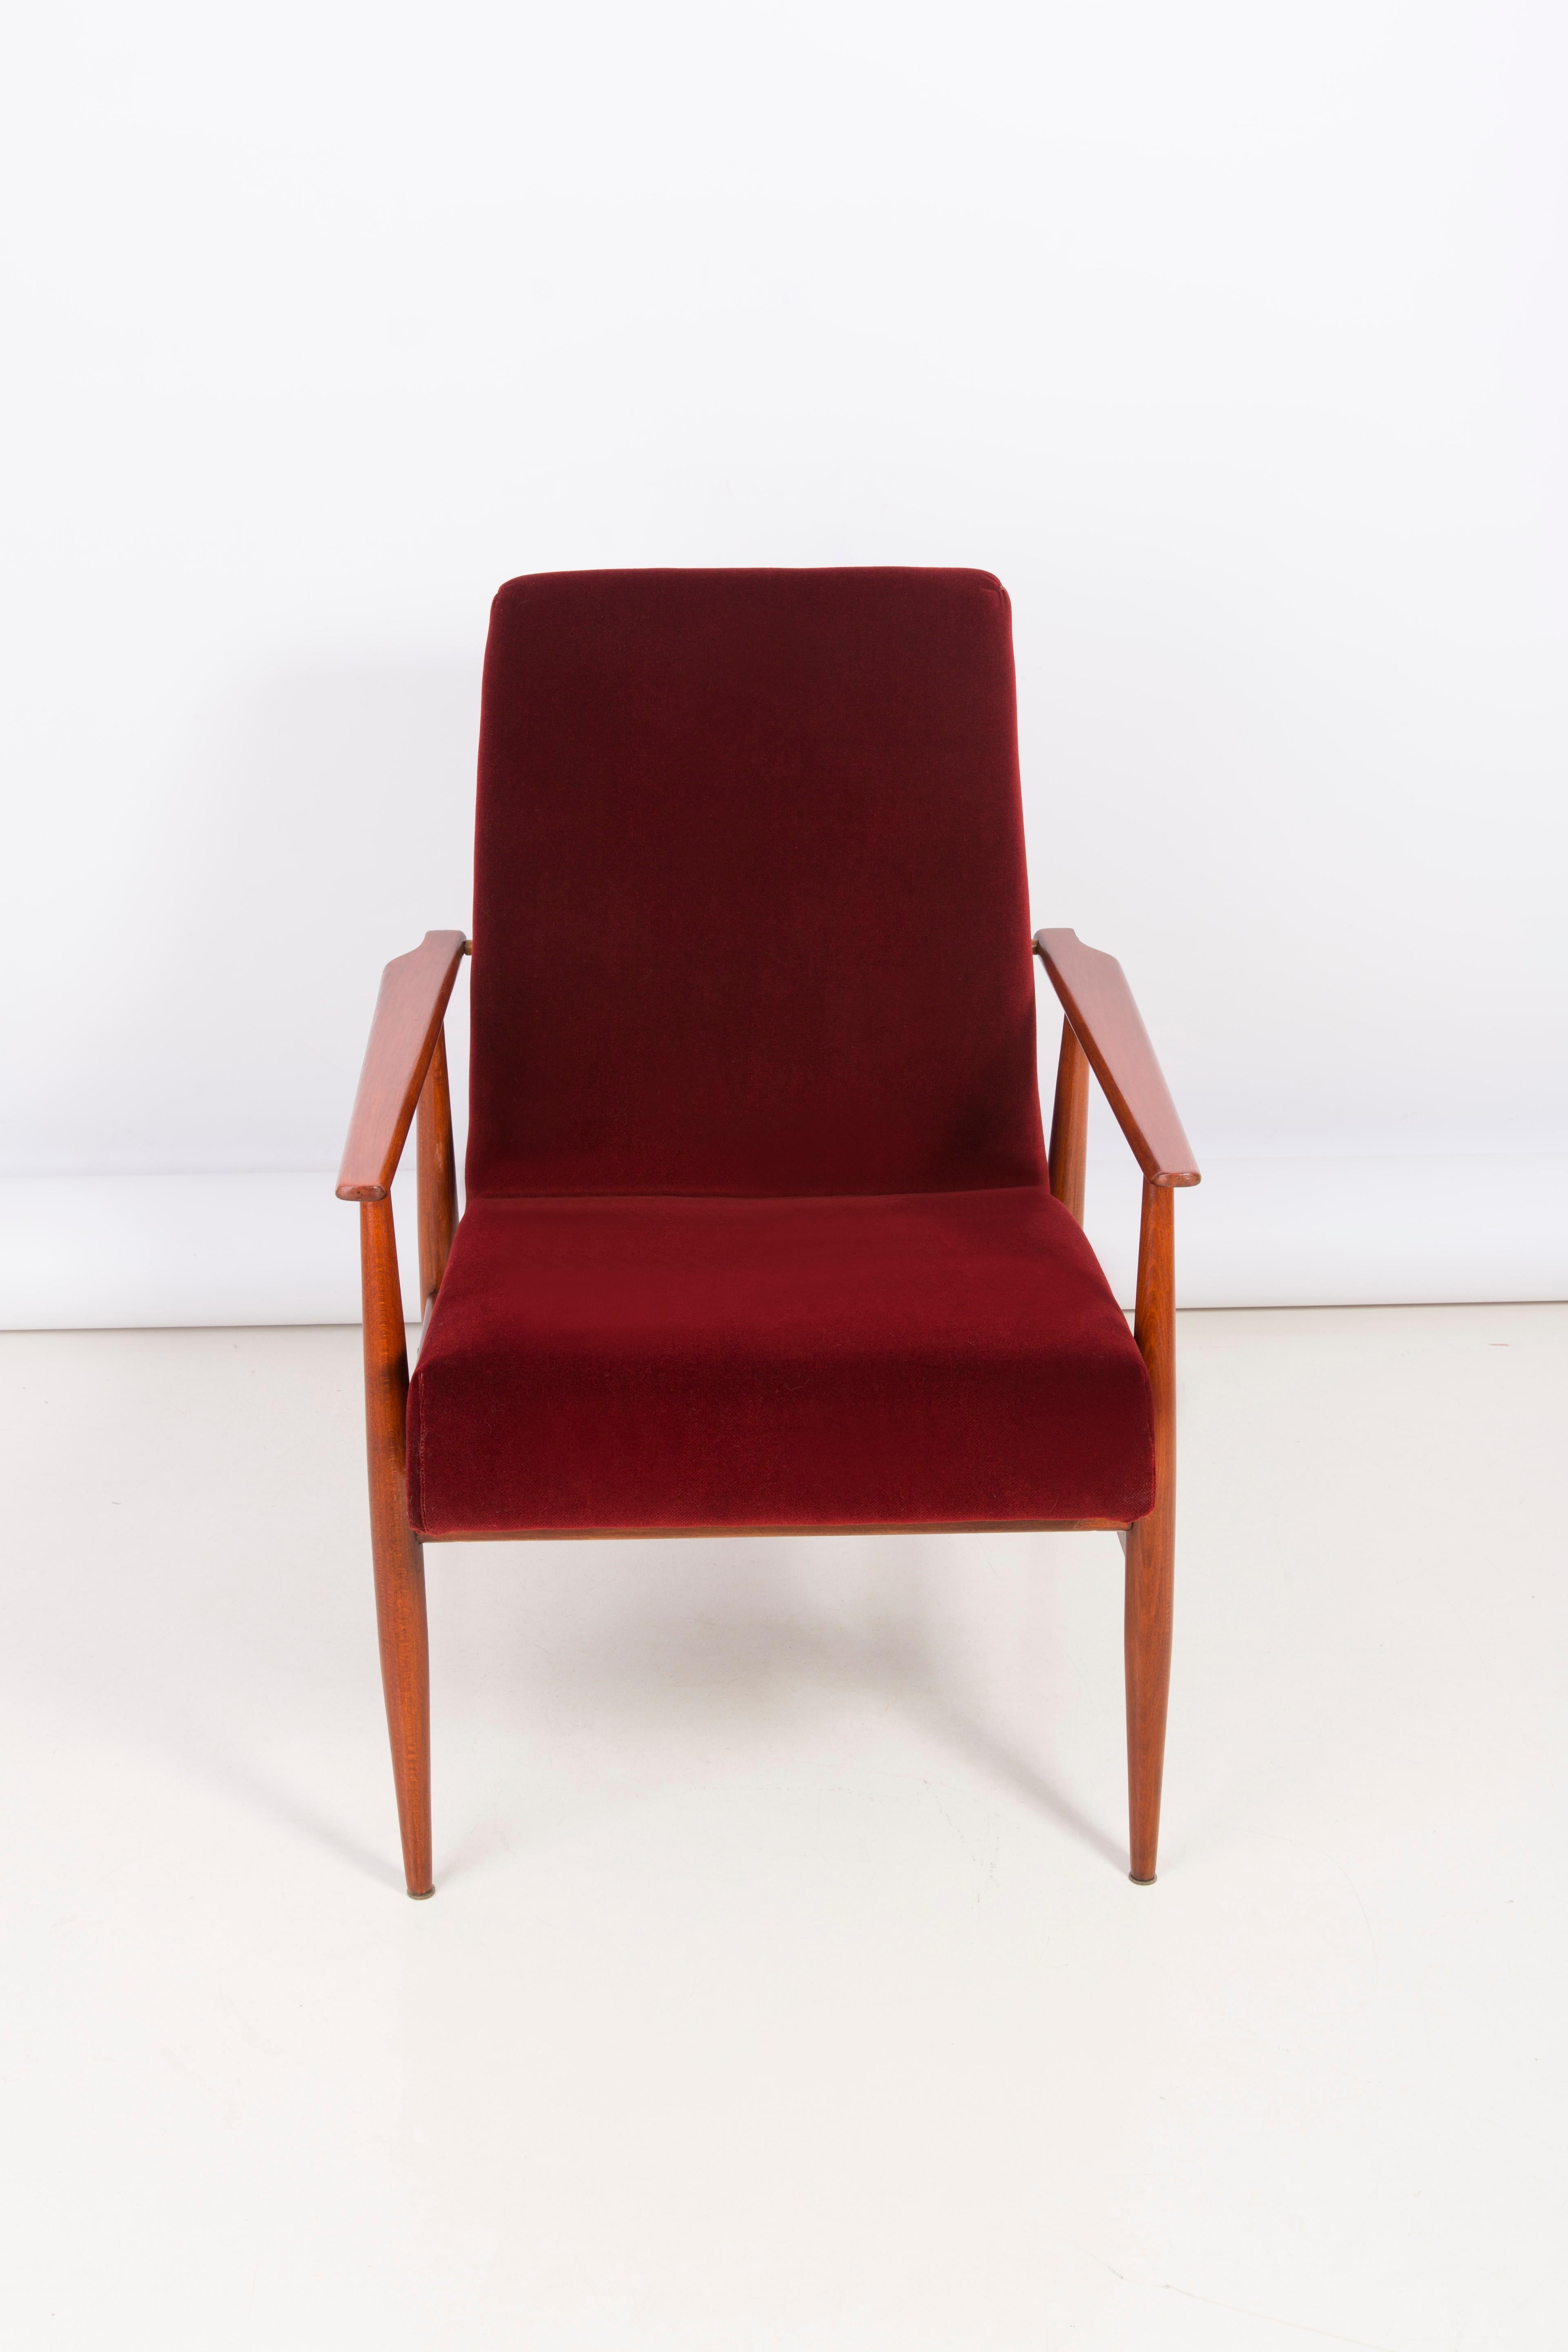 Set of Two 20th Century Burgundy Dark Red Dante Armchairs, H. Lis, 1960s In Excellent Condition For Sale In 05-080 Hornowek, PL